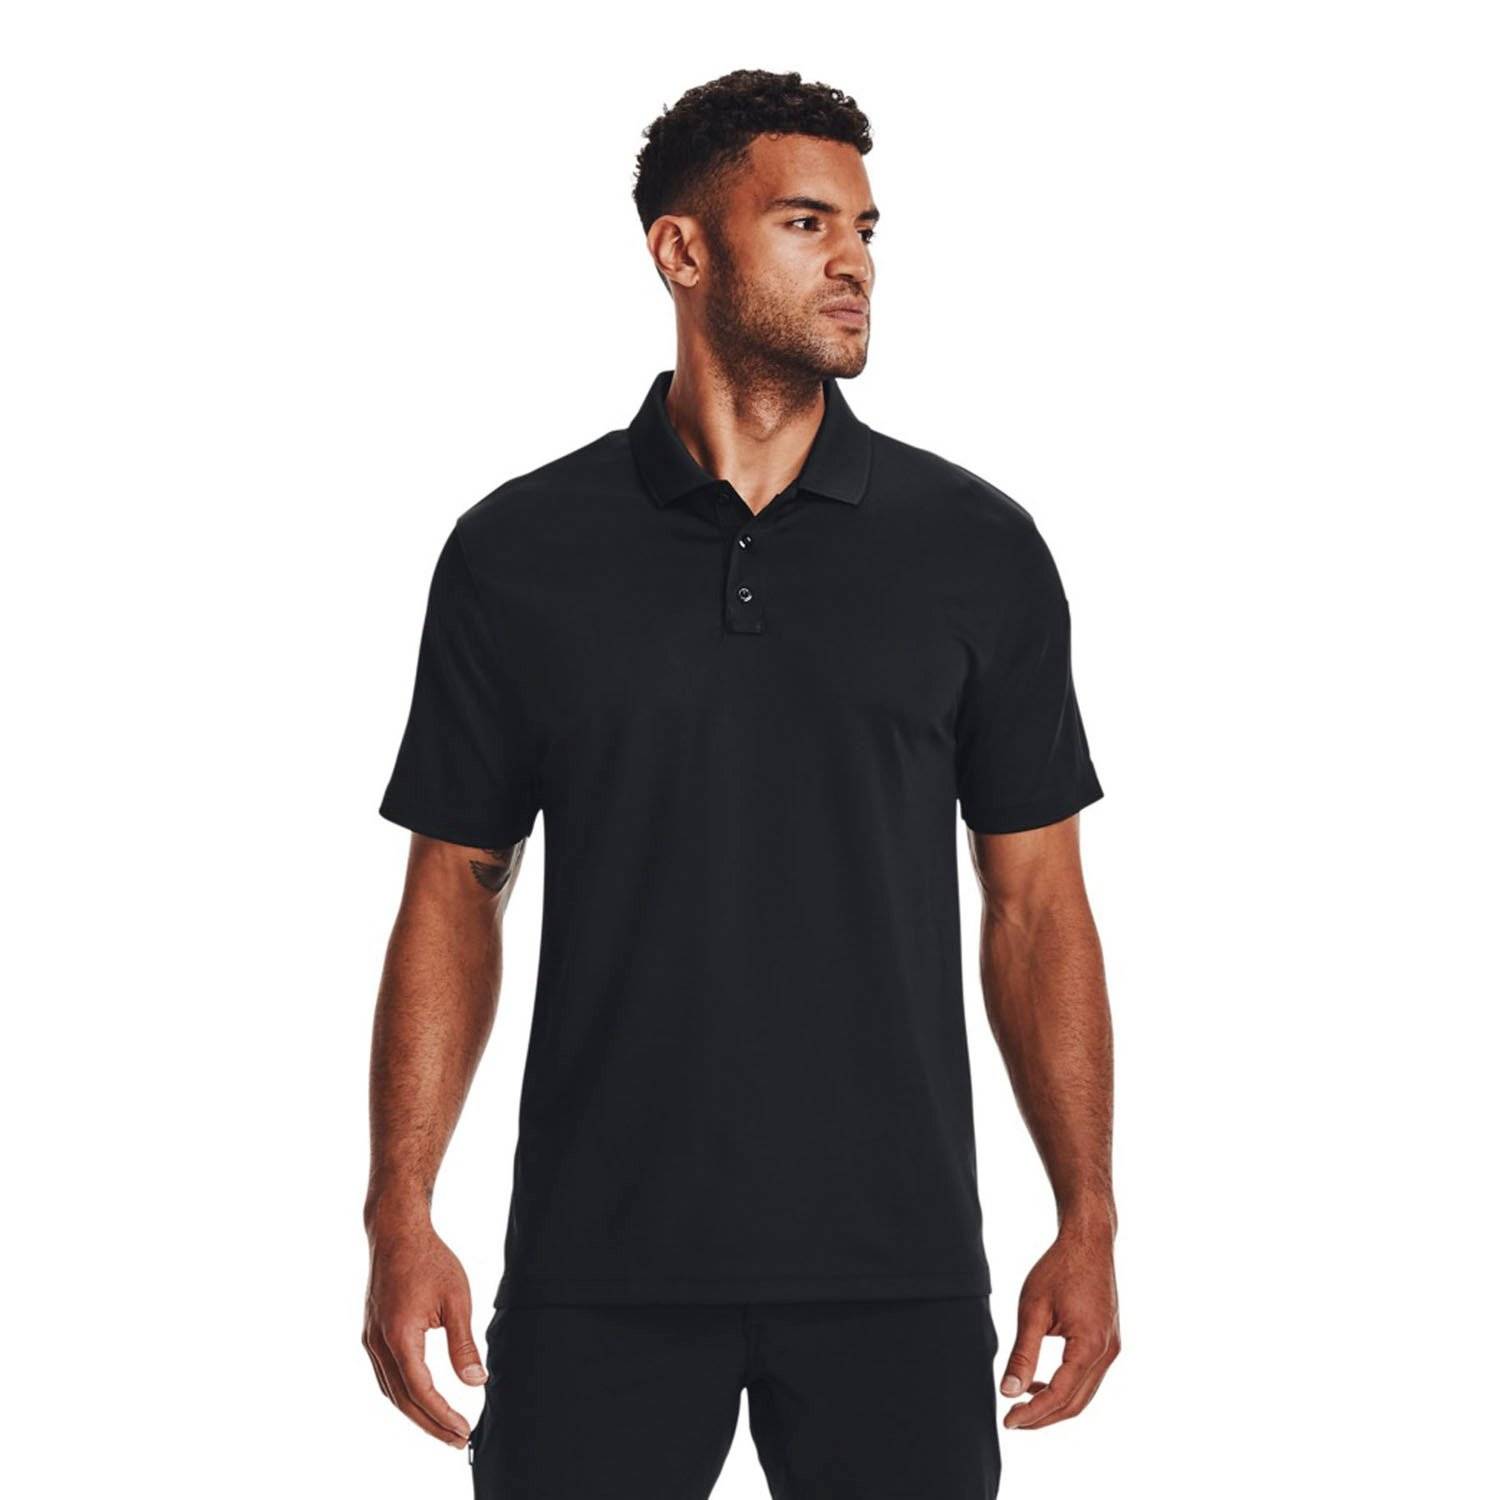 Under Armour Tactical Performance Short-Sleeve Polo Shirt for Men -  Graphite - 2XL